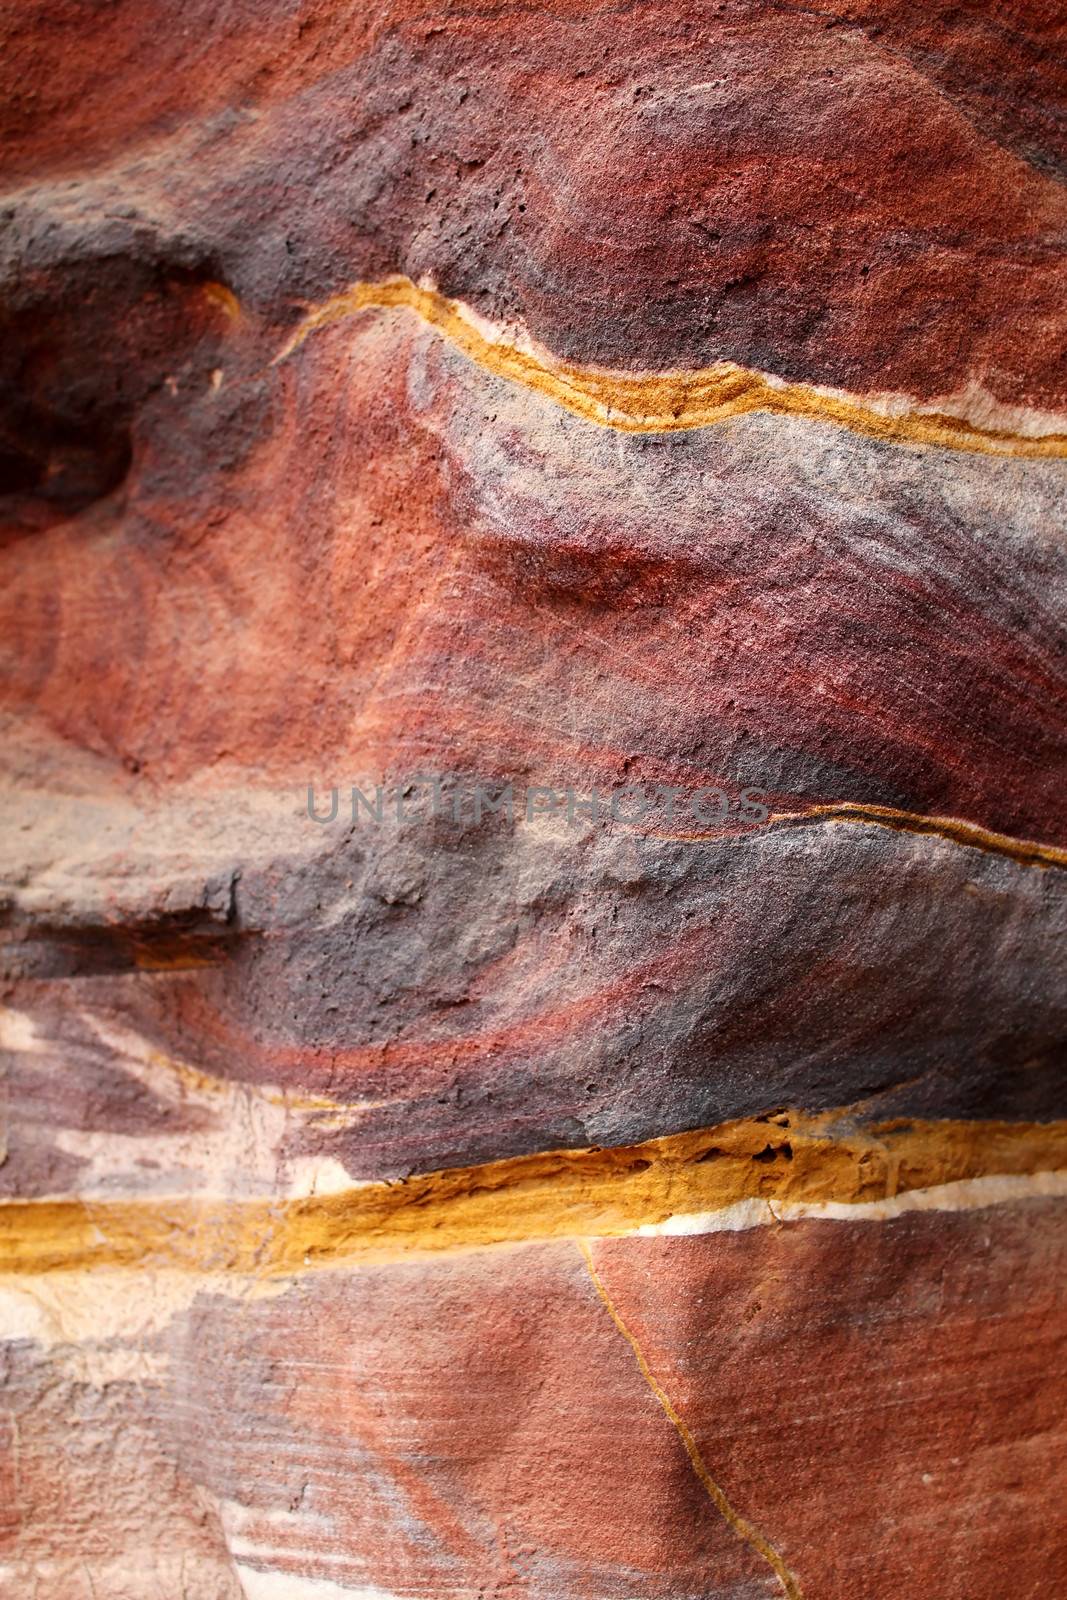 Sandstone gorge abstract pattern formation, Rose City cave, Siq, Petra, Jordan